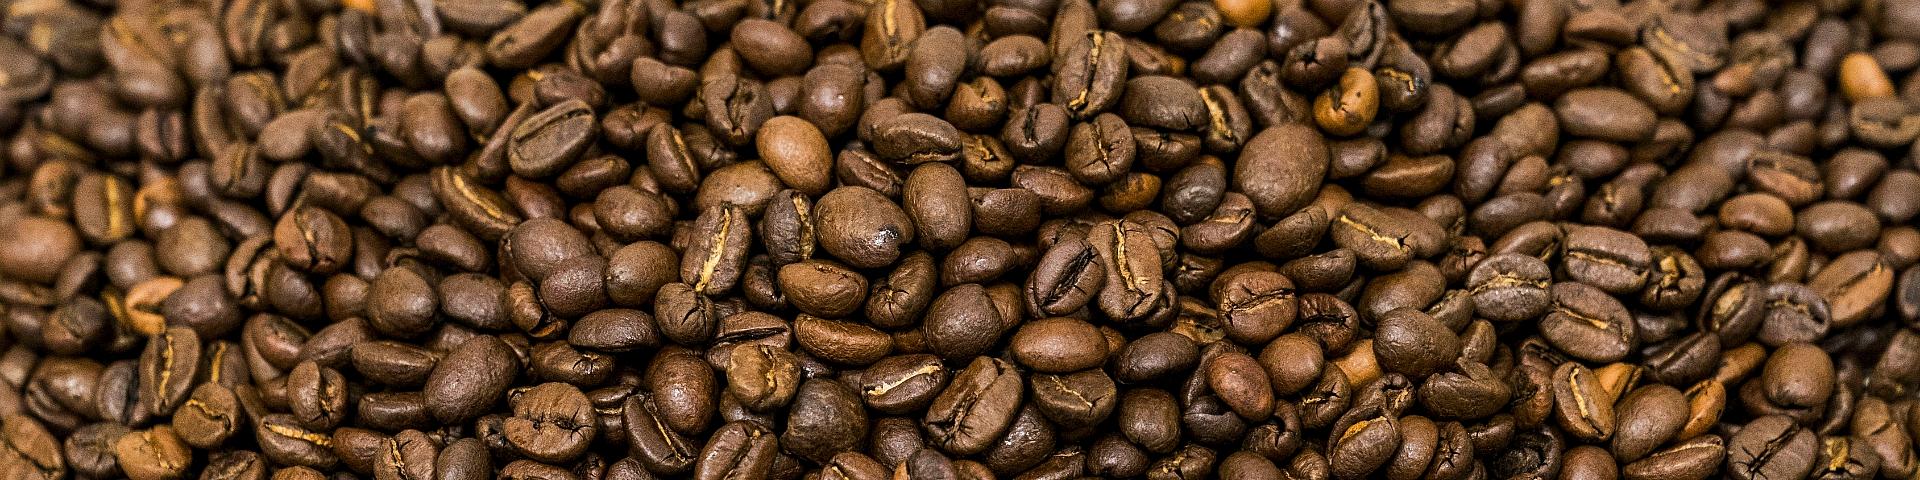 import coffee beans to usa